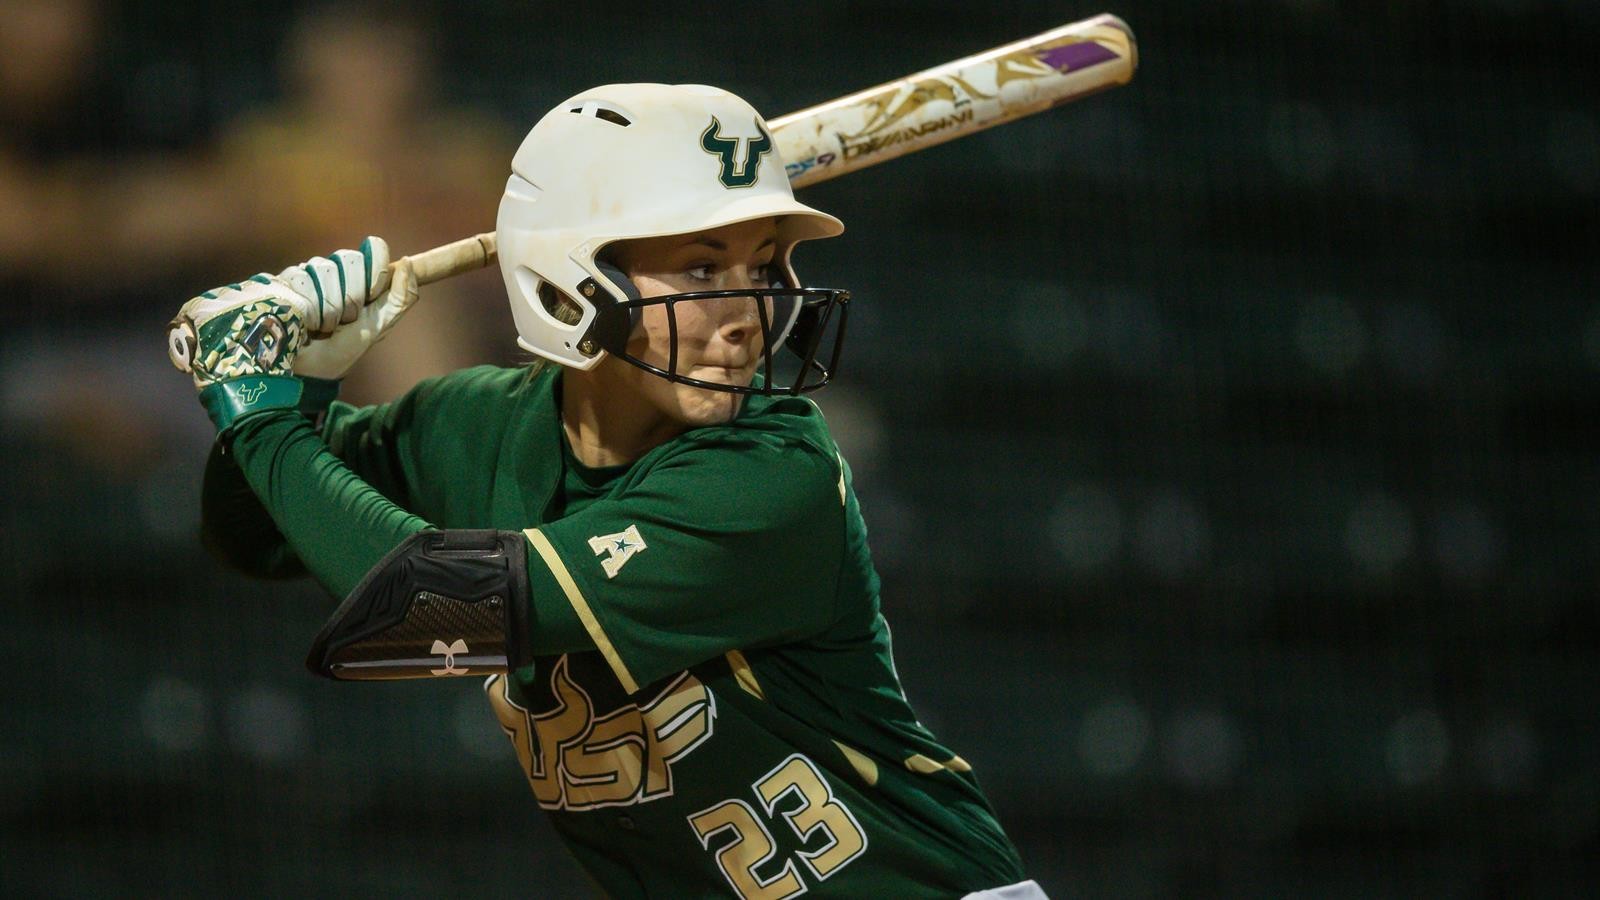 USF Softball Sweeps Day 1 of Under Armour Invitational